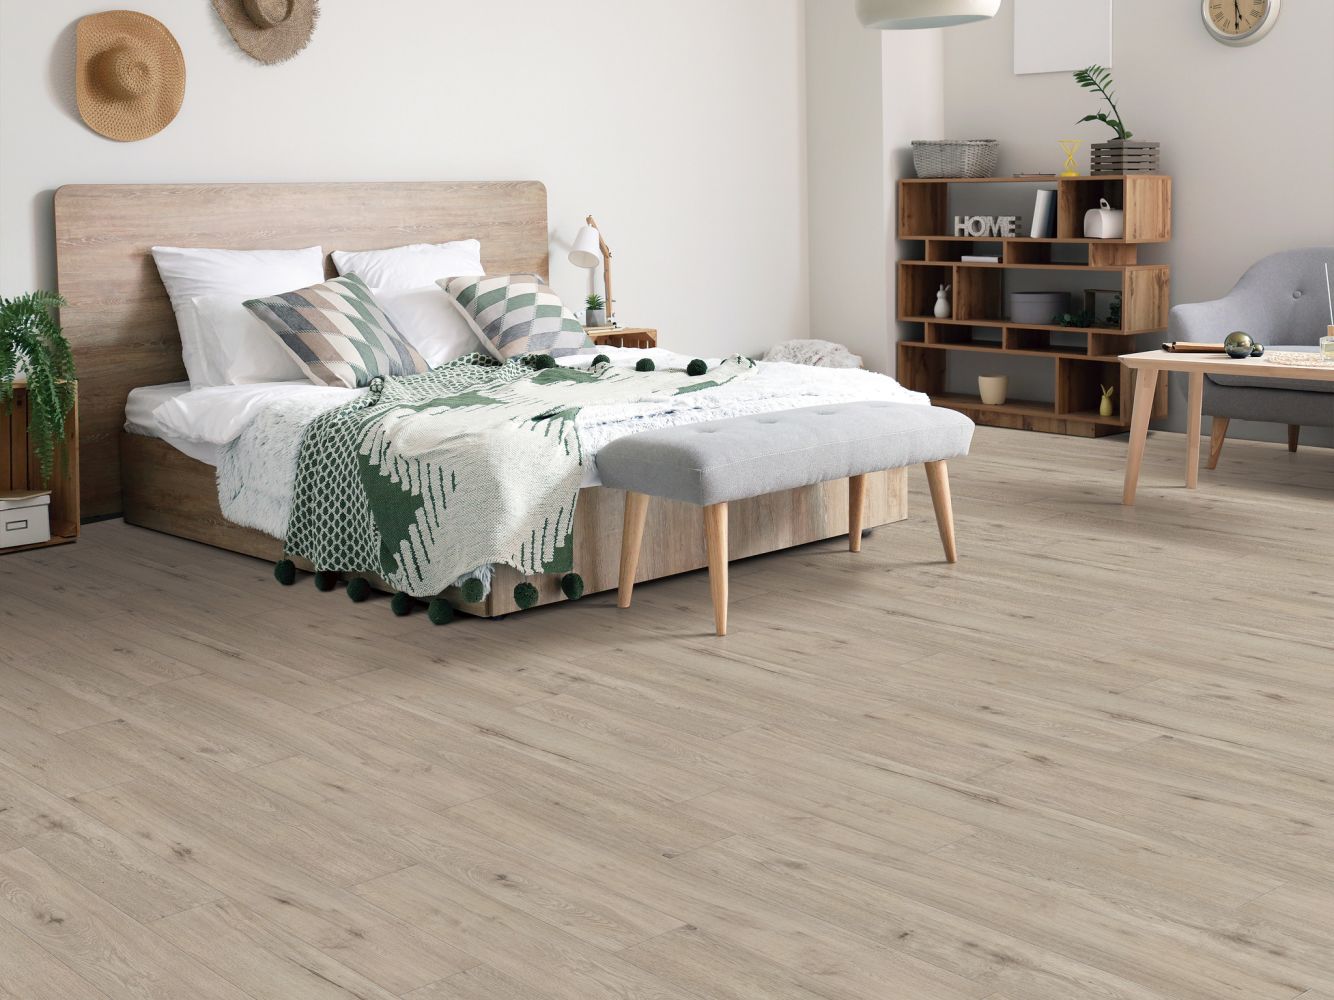 Shaw Floors Resilient Residential Pantheon HD Plus Argento 01185_2001V